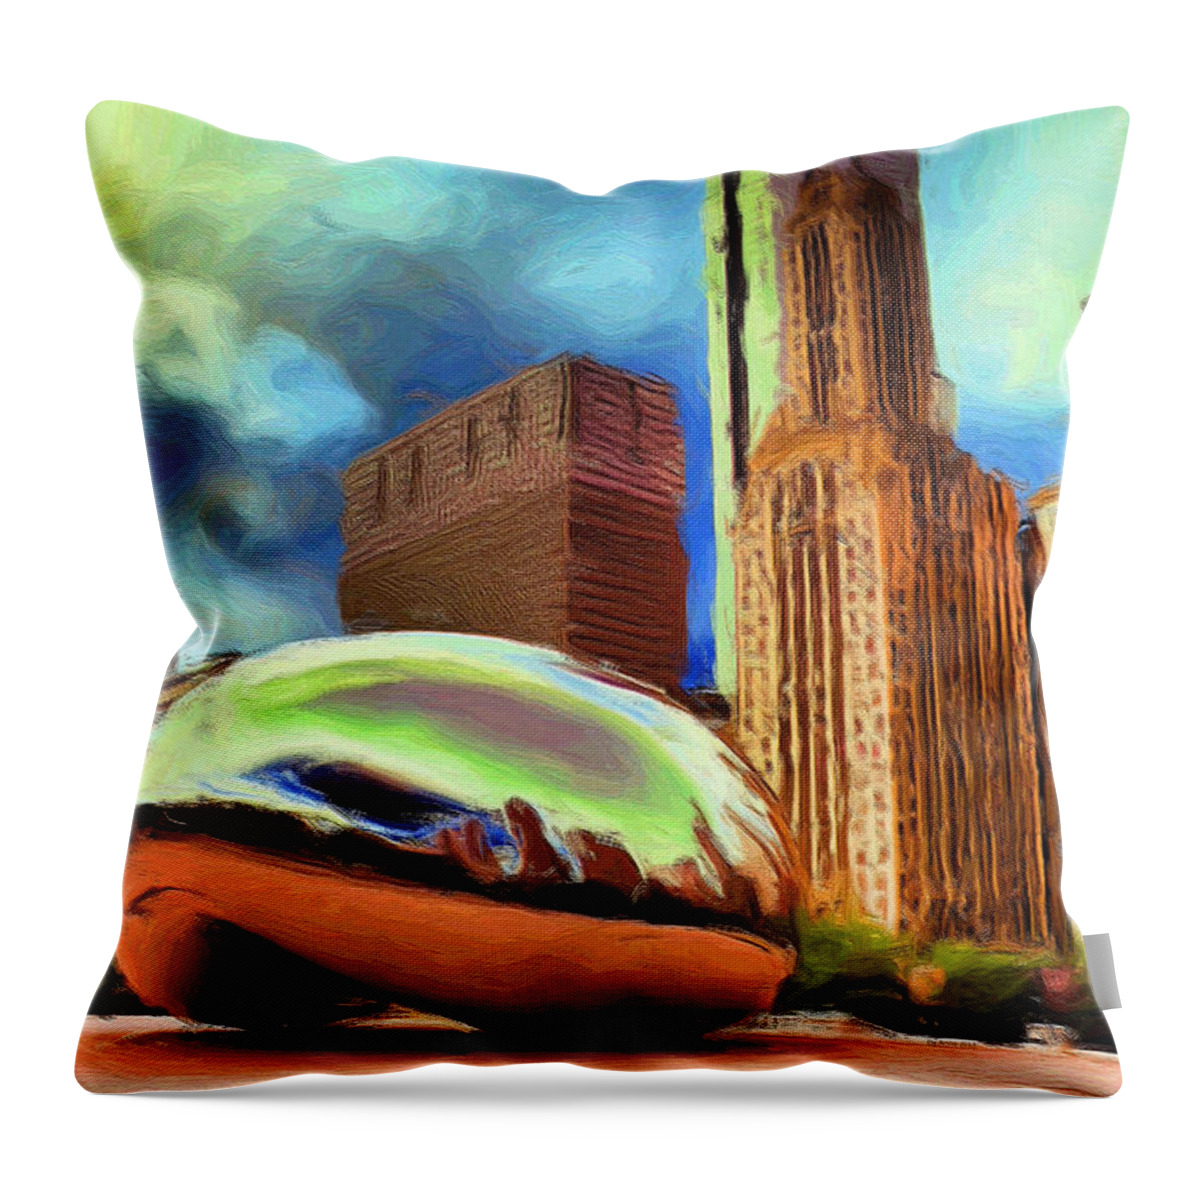 Cloudgate Throw Pillow featuring the painting The Bean - 20 by Ely Arsha